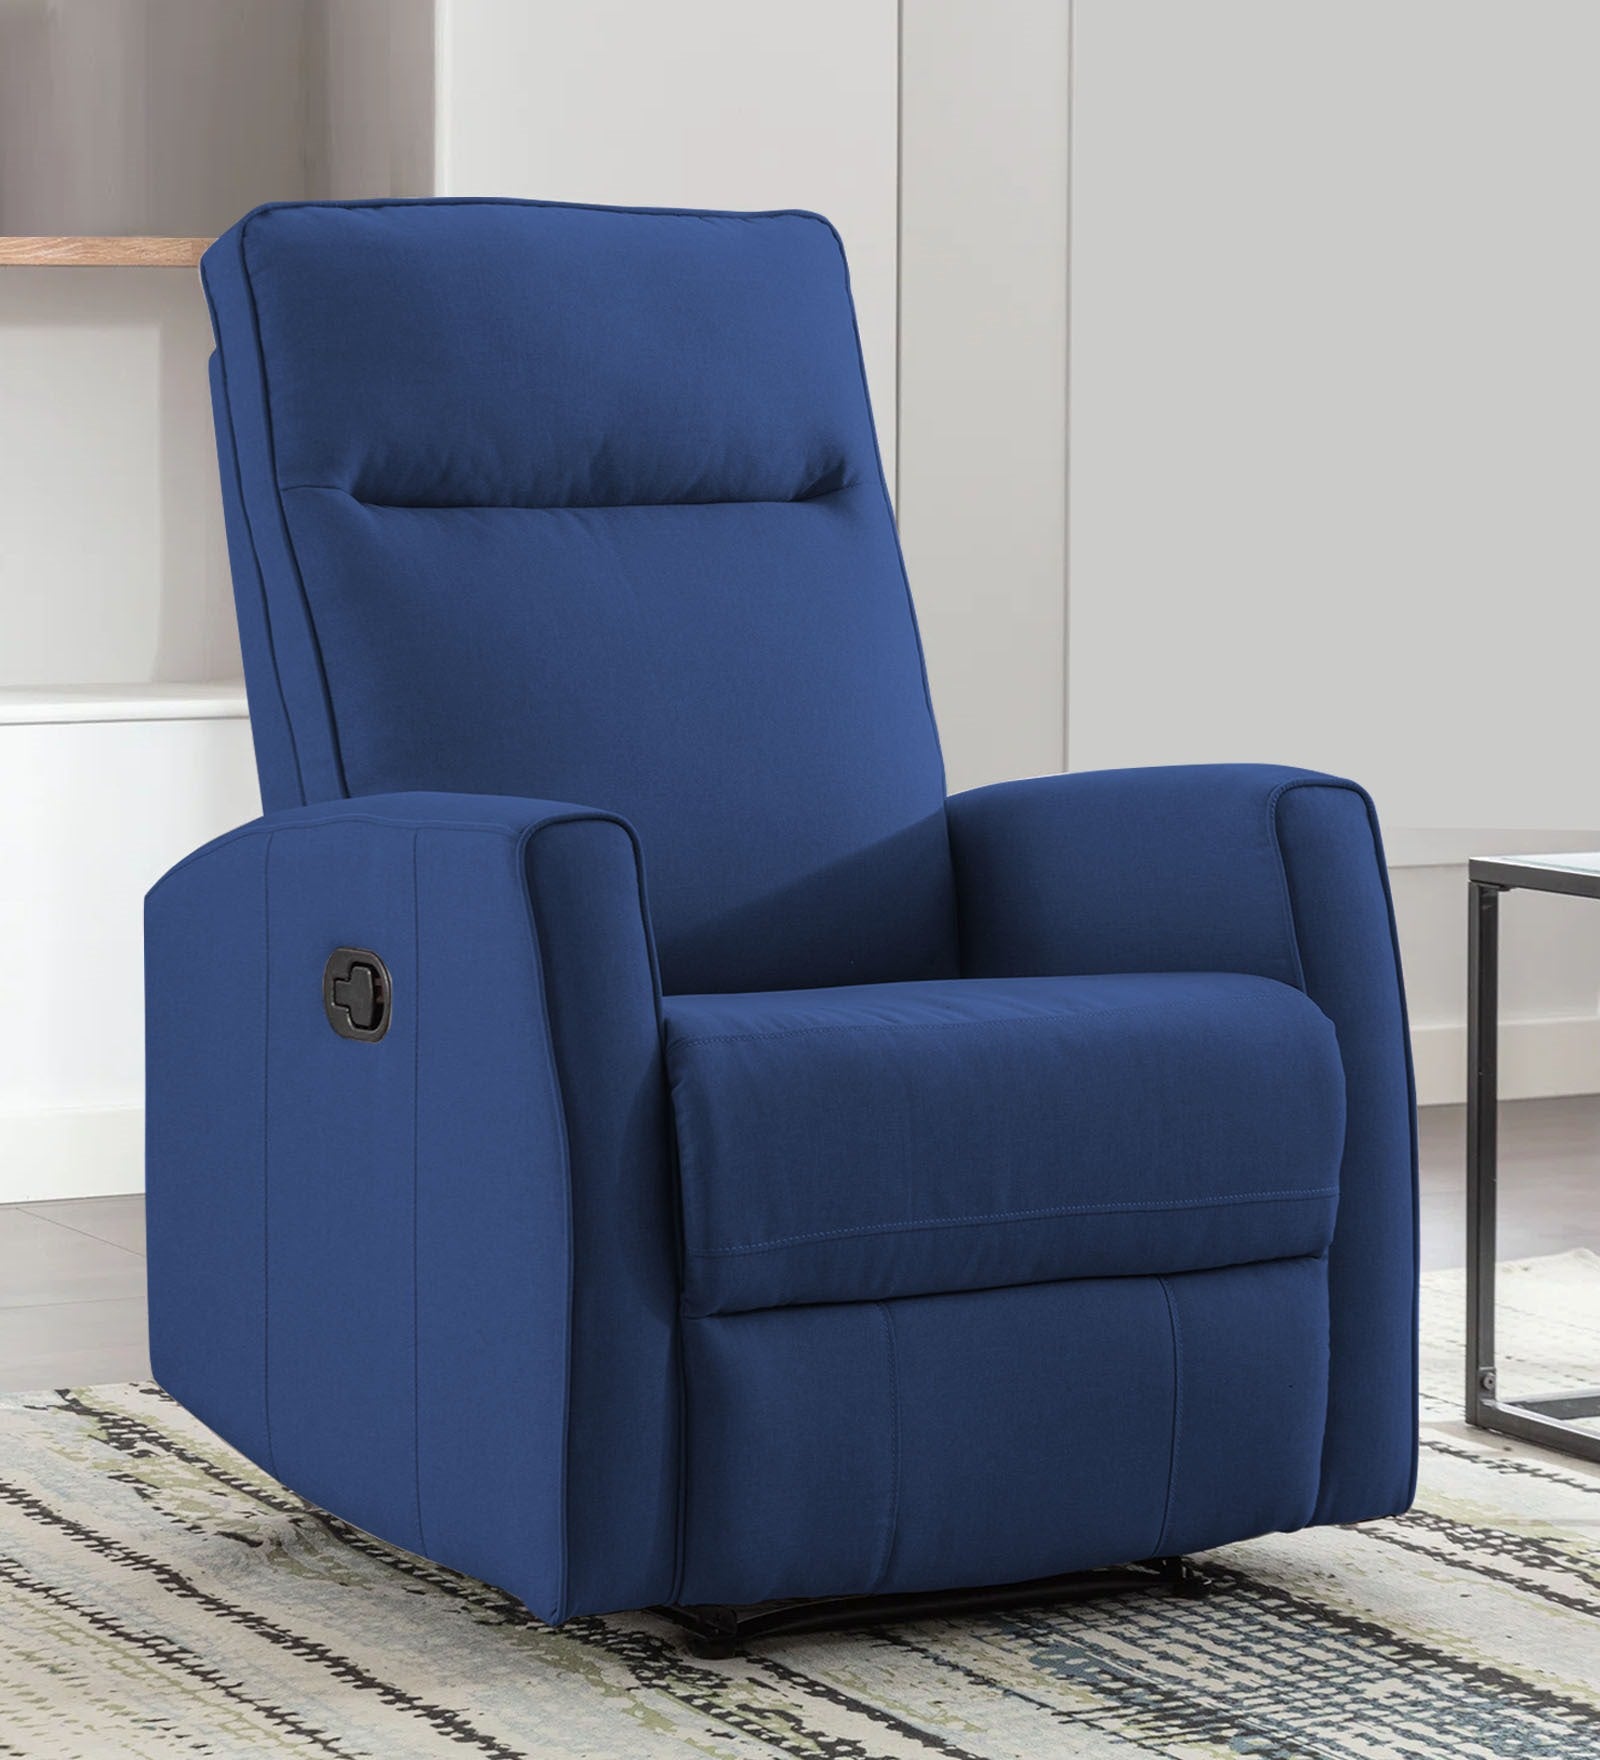 Logan Fabric Manual 1 Seater Recliner In Light Blue Colour